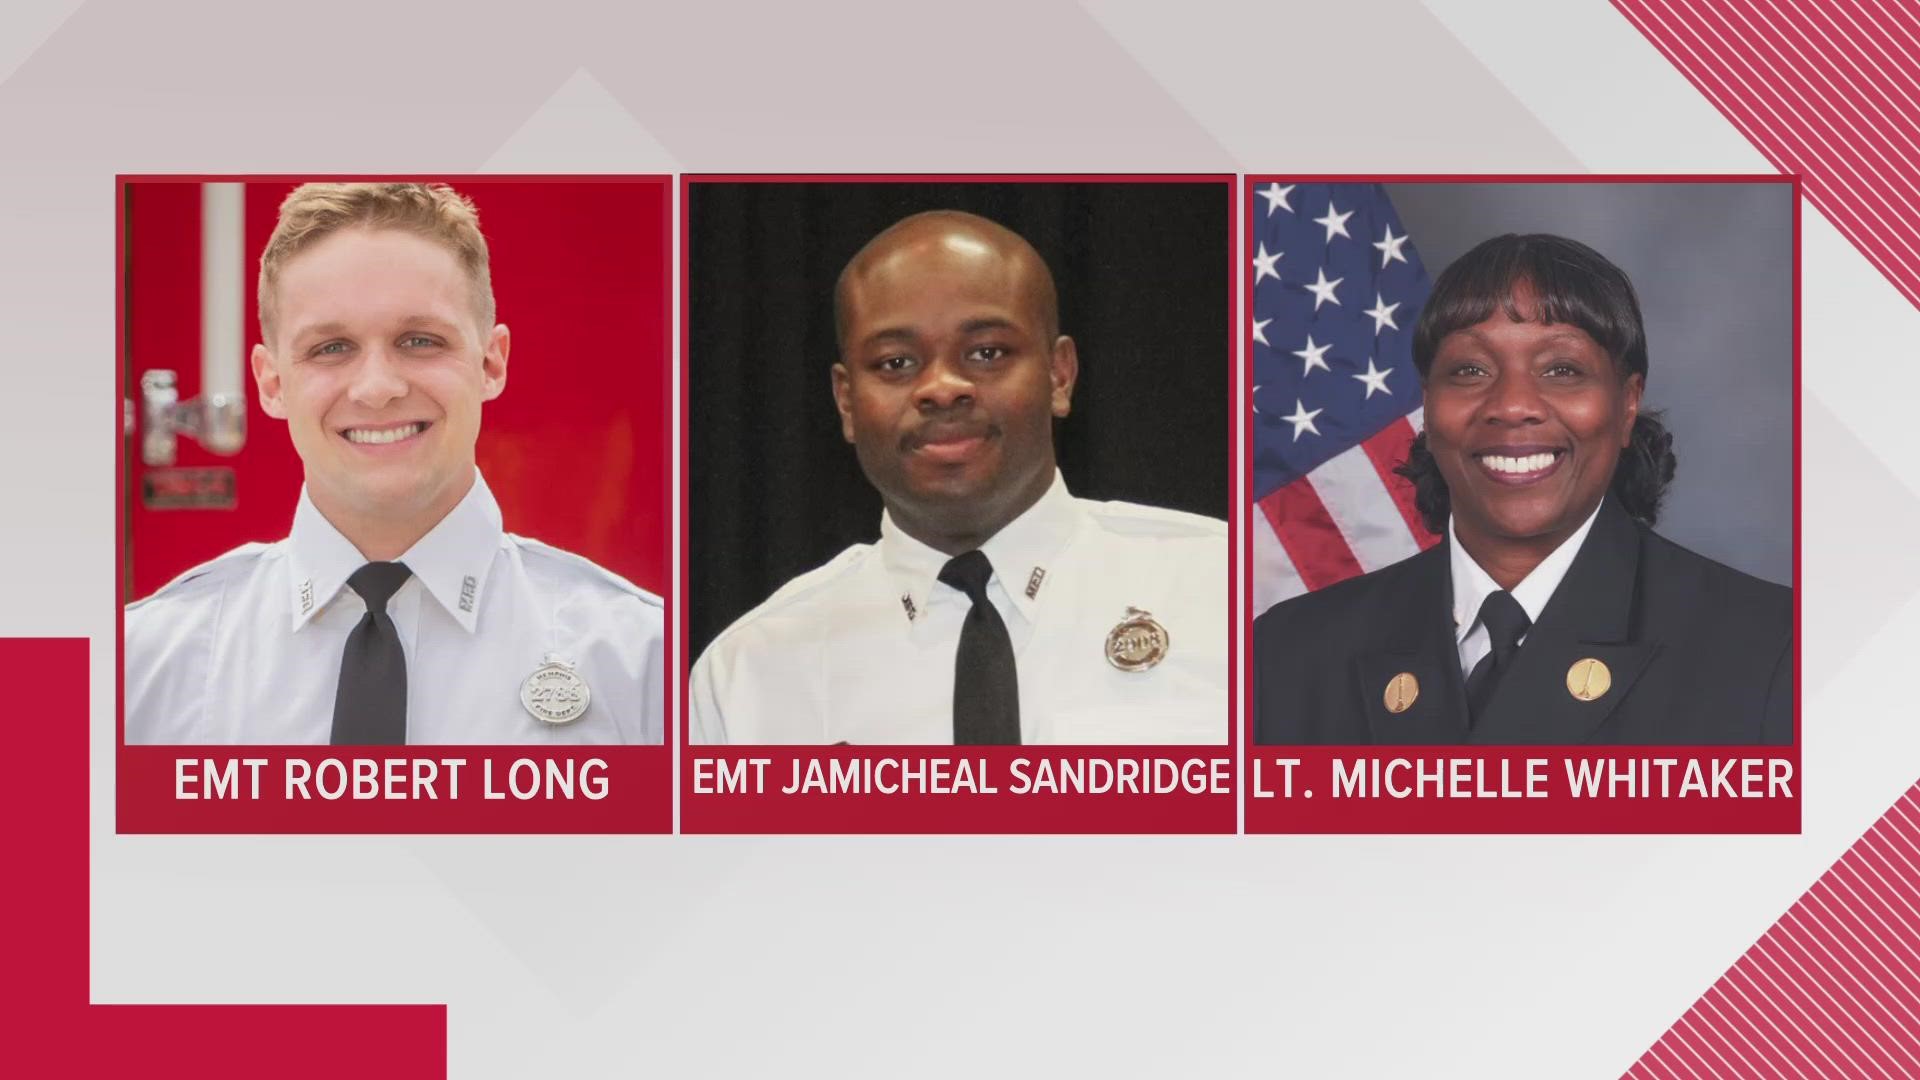 MFD said Robert Long, JaMicheal Sandridge, and Lt. Michelle Whitaker have been terminated for violating “numerous MFD Policies and Protocols."